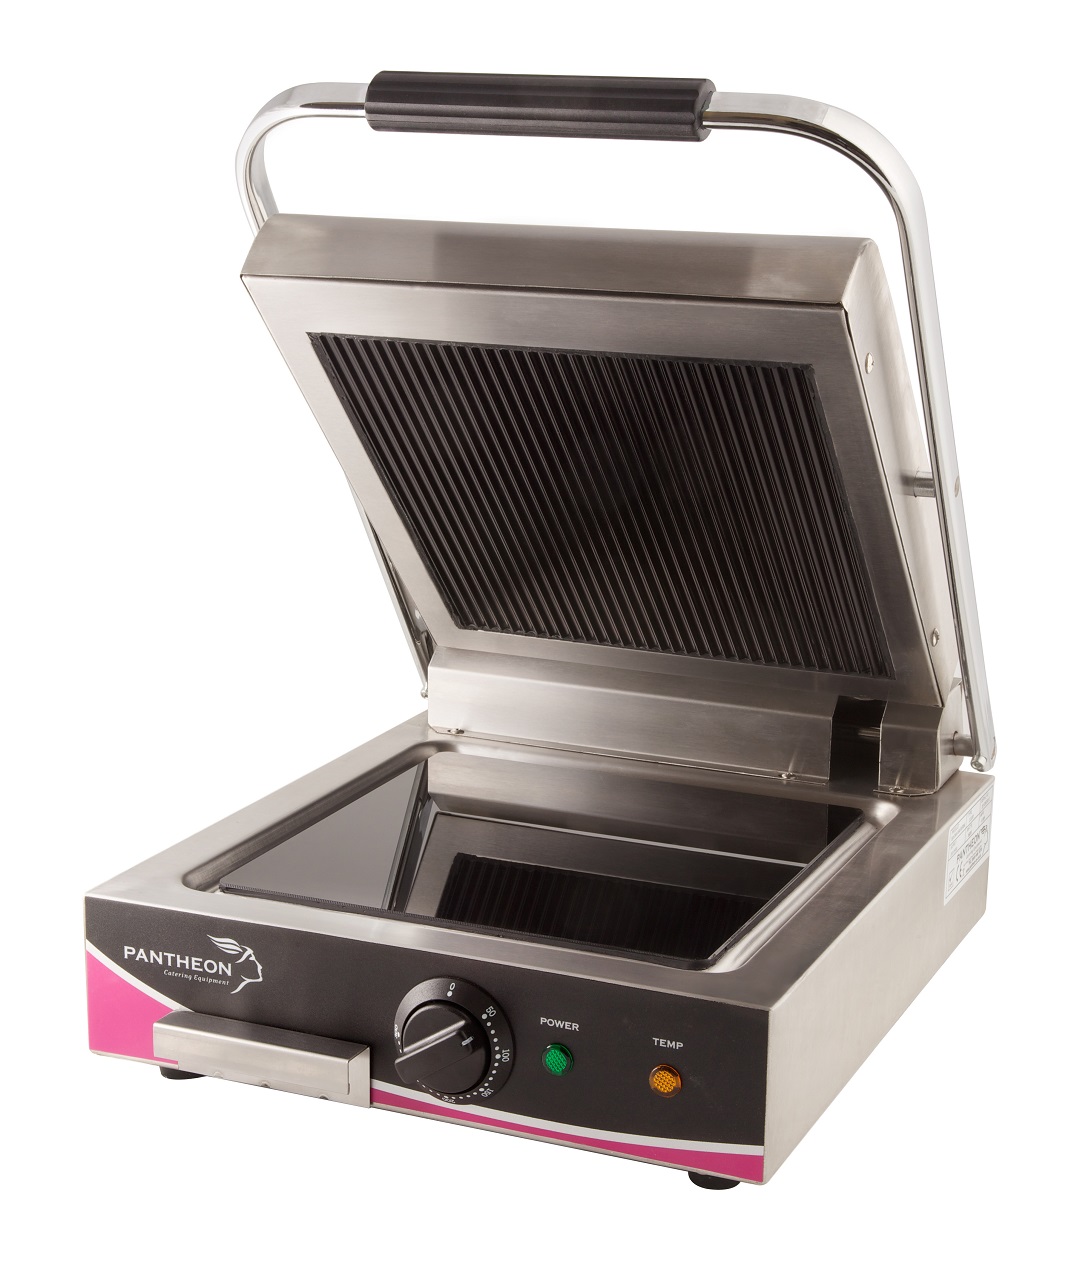 Pantheon Small Single Contact Grill